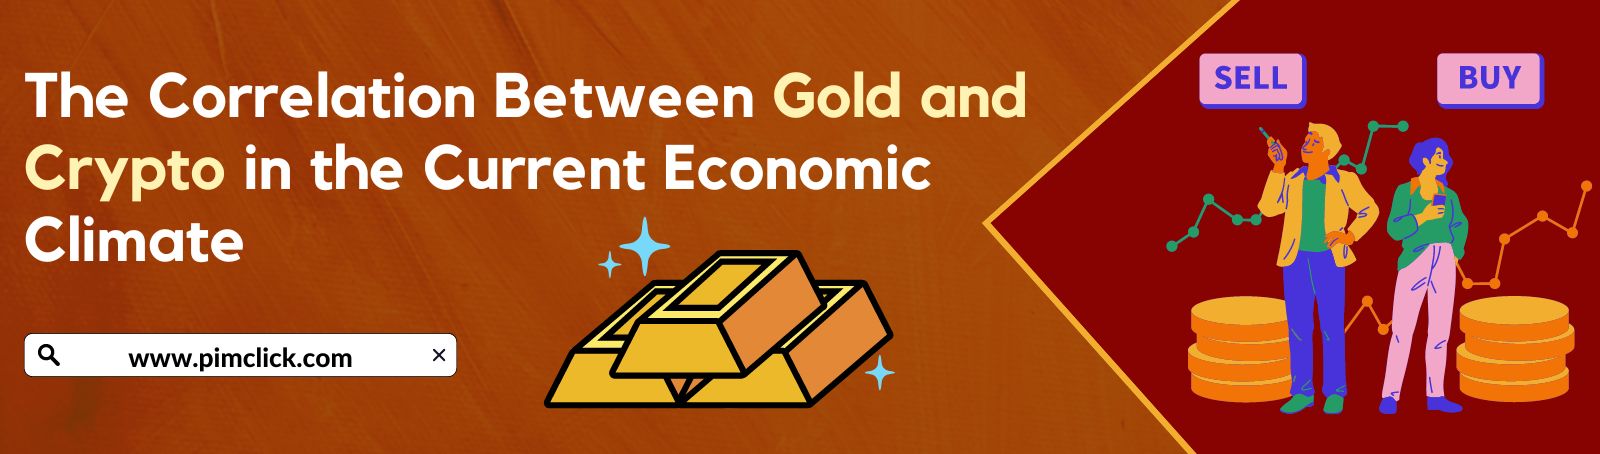 the-correlation-between-gold-and-crypto-in-the-current-economic-climate